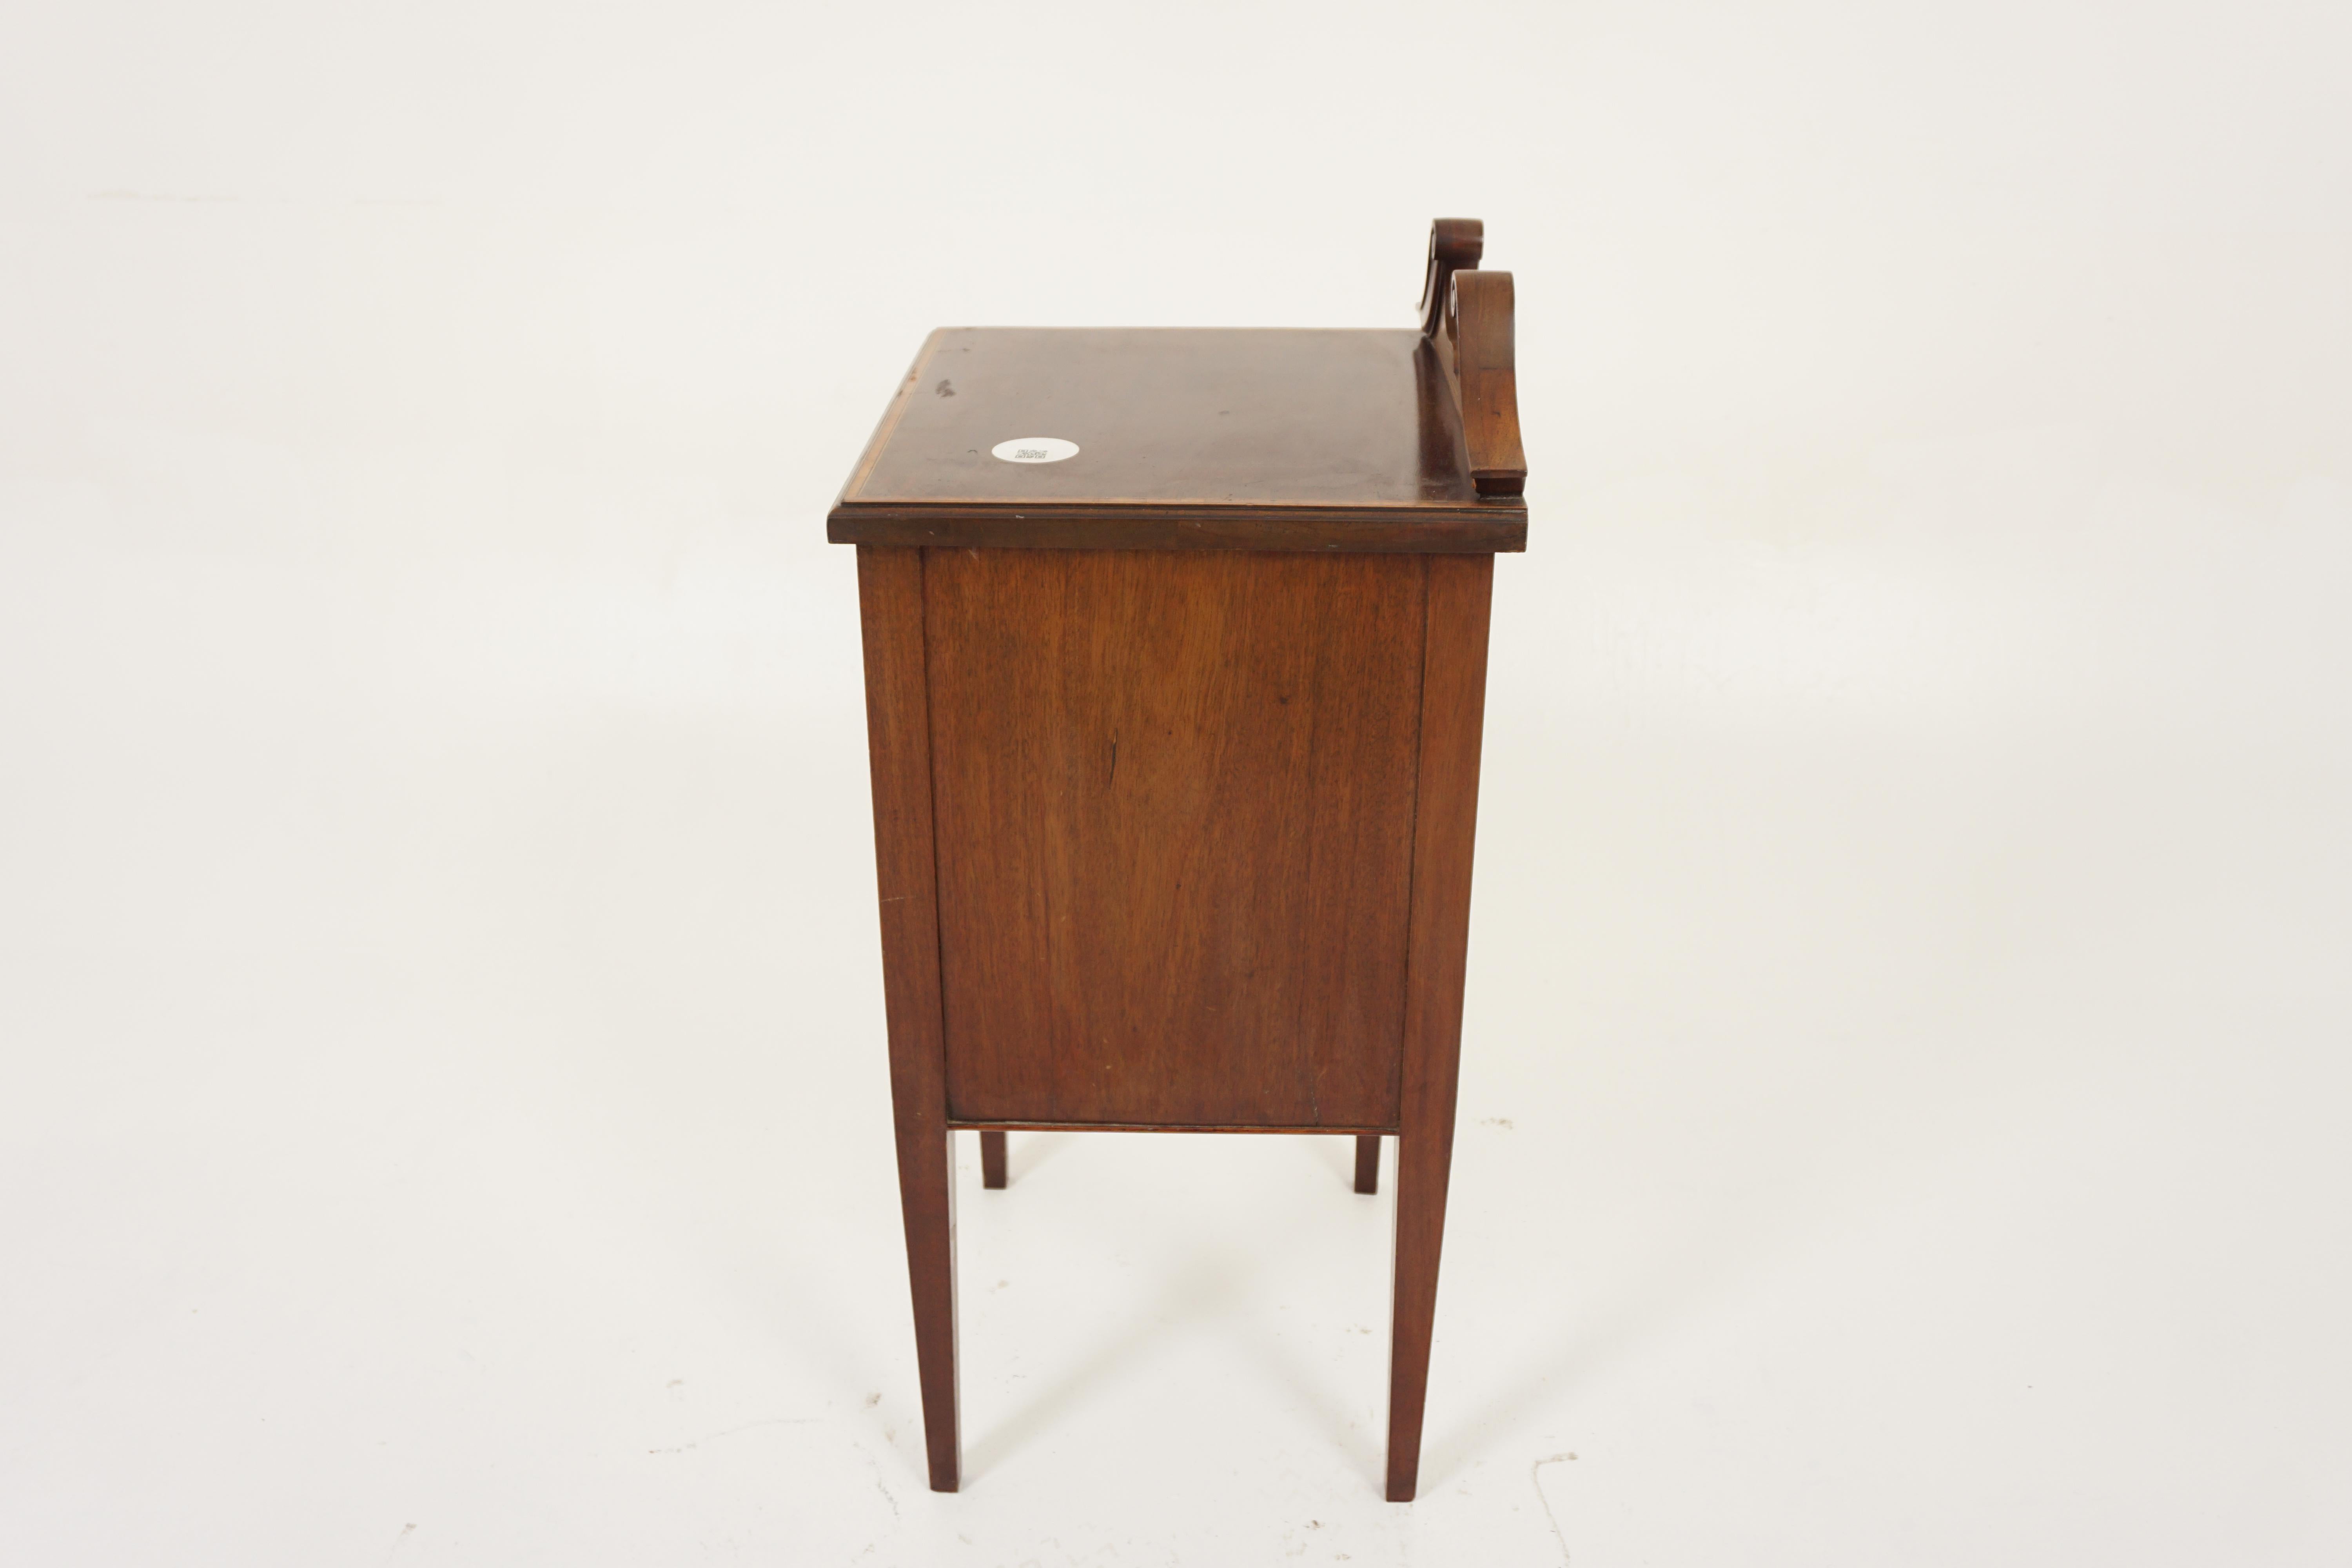 Early 20th Century Antique Walnut Nightstand, Inlaid Walnut Bedside Table, Scotland 1900, H1084 For Sale